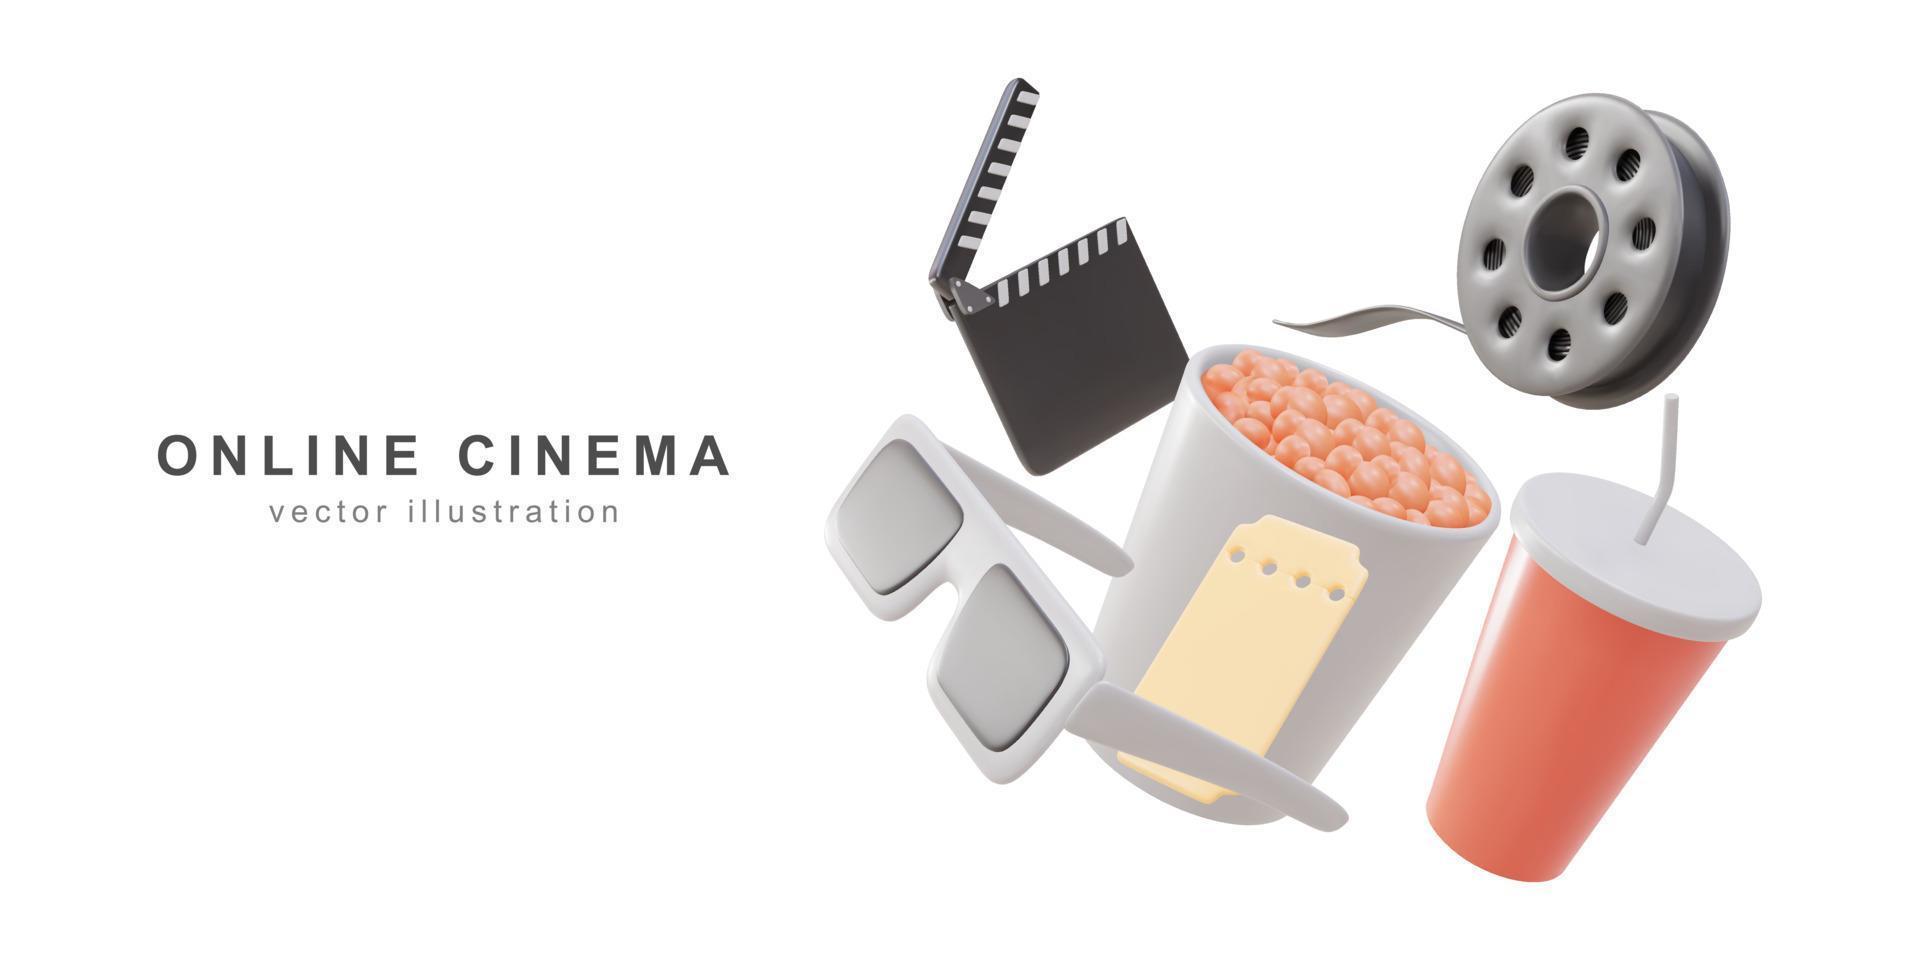 Online cinema art movie watching with popcorn, 3d glasses and film-strip cinematography concept. Vector illustration.